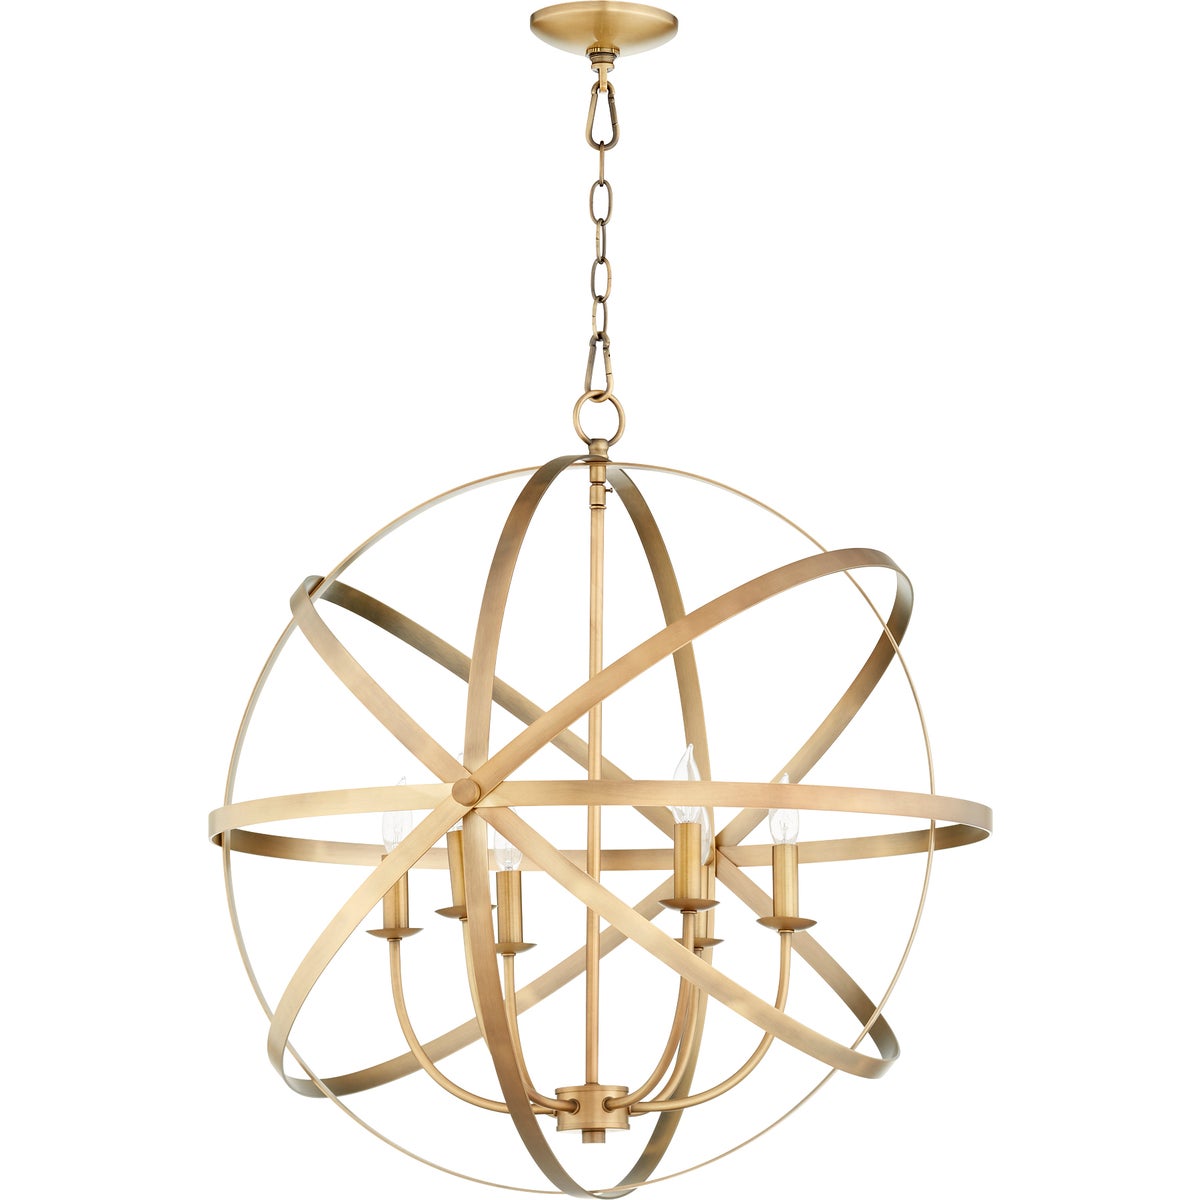 A futuristic gold sphere chandelier with strategically placed metal rings and candelabra lights. Illuminate any space with this modern Quorum International Sphere Chandelier.